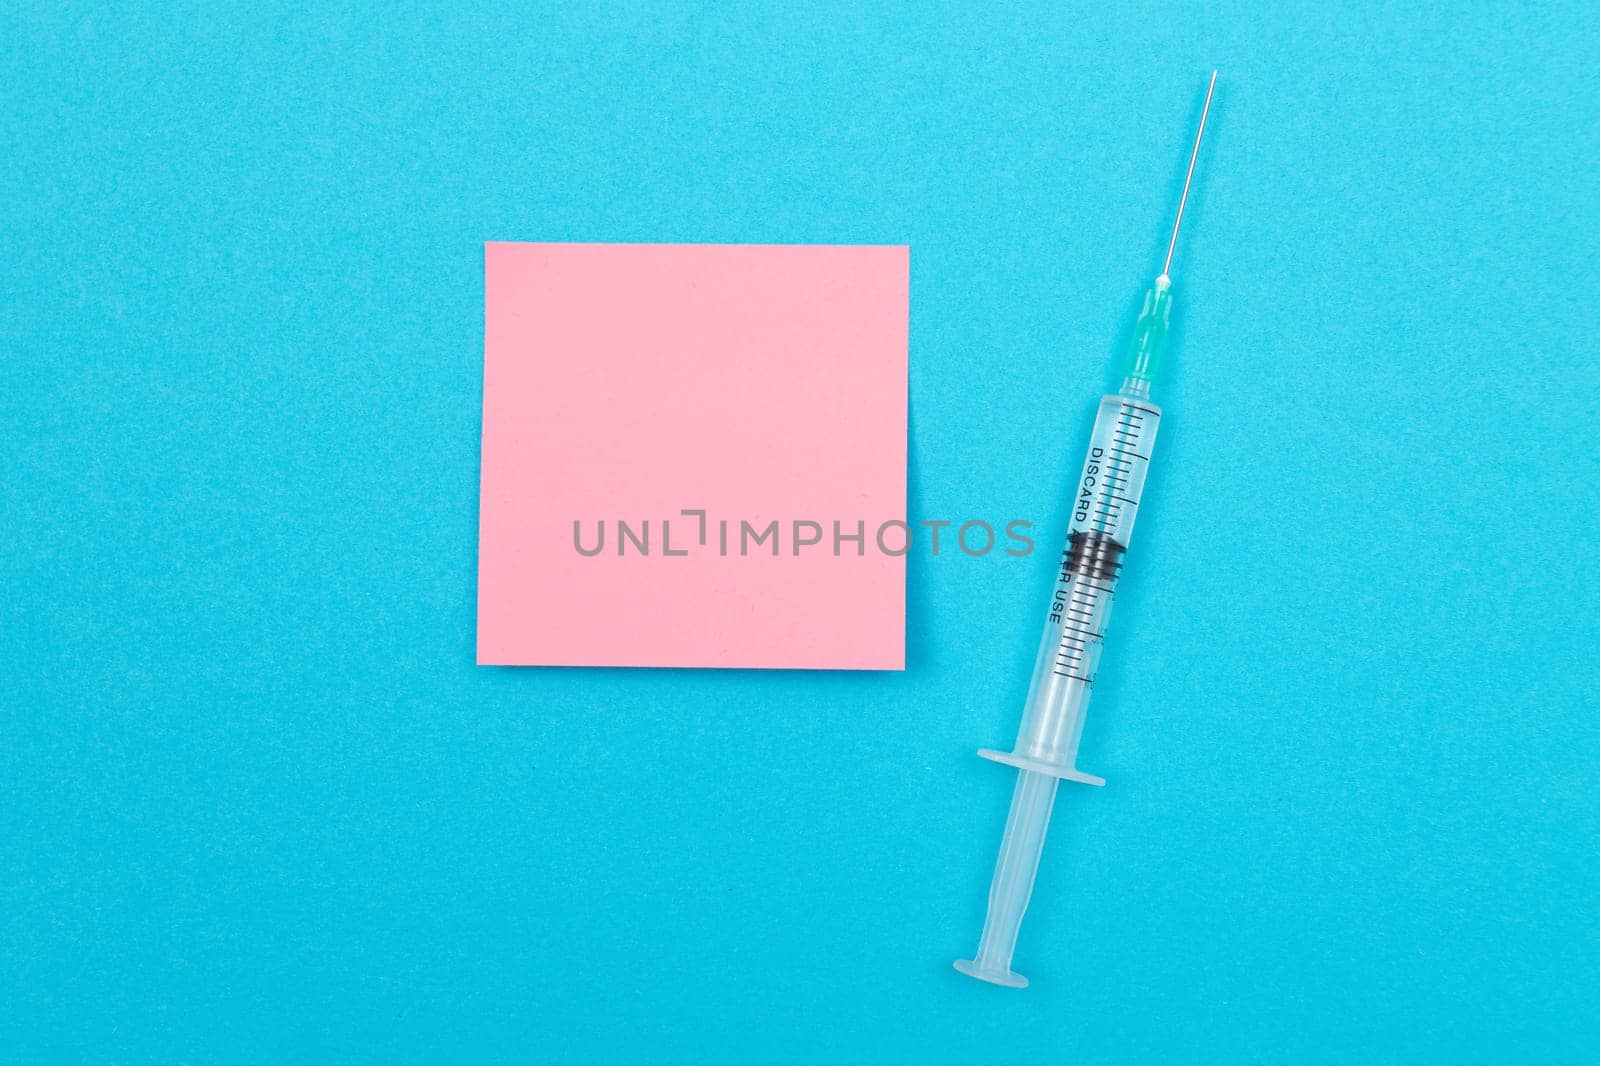 Vaccination, Immunology or Revaccination Concept - A Medical Disposable Syringe Lying on Blue Table in Doctor's Office in a Hospital or Clinic. Blank Pink Sticky Note - Mock Up with Copy Space